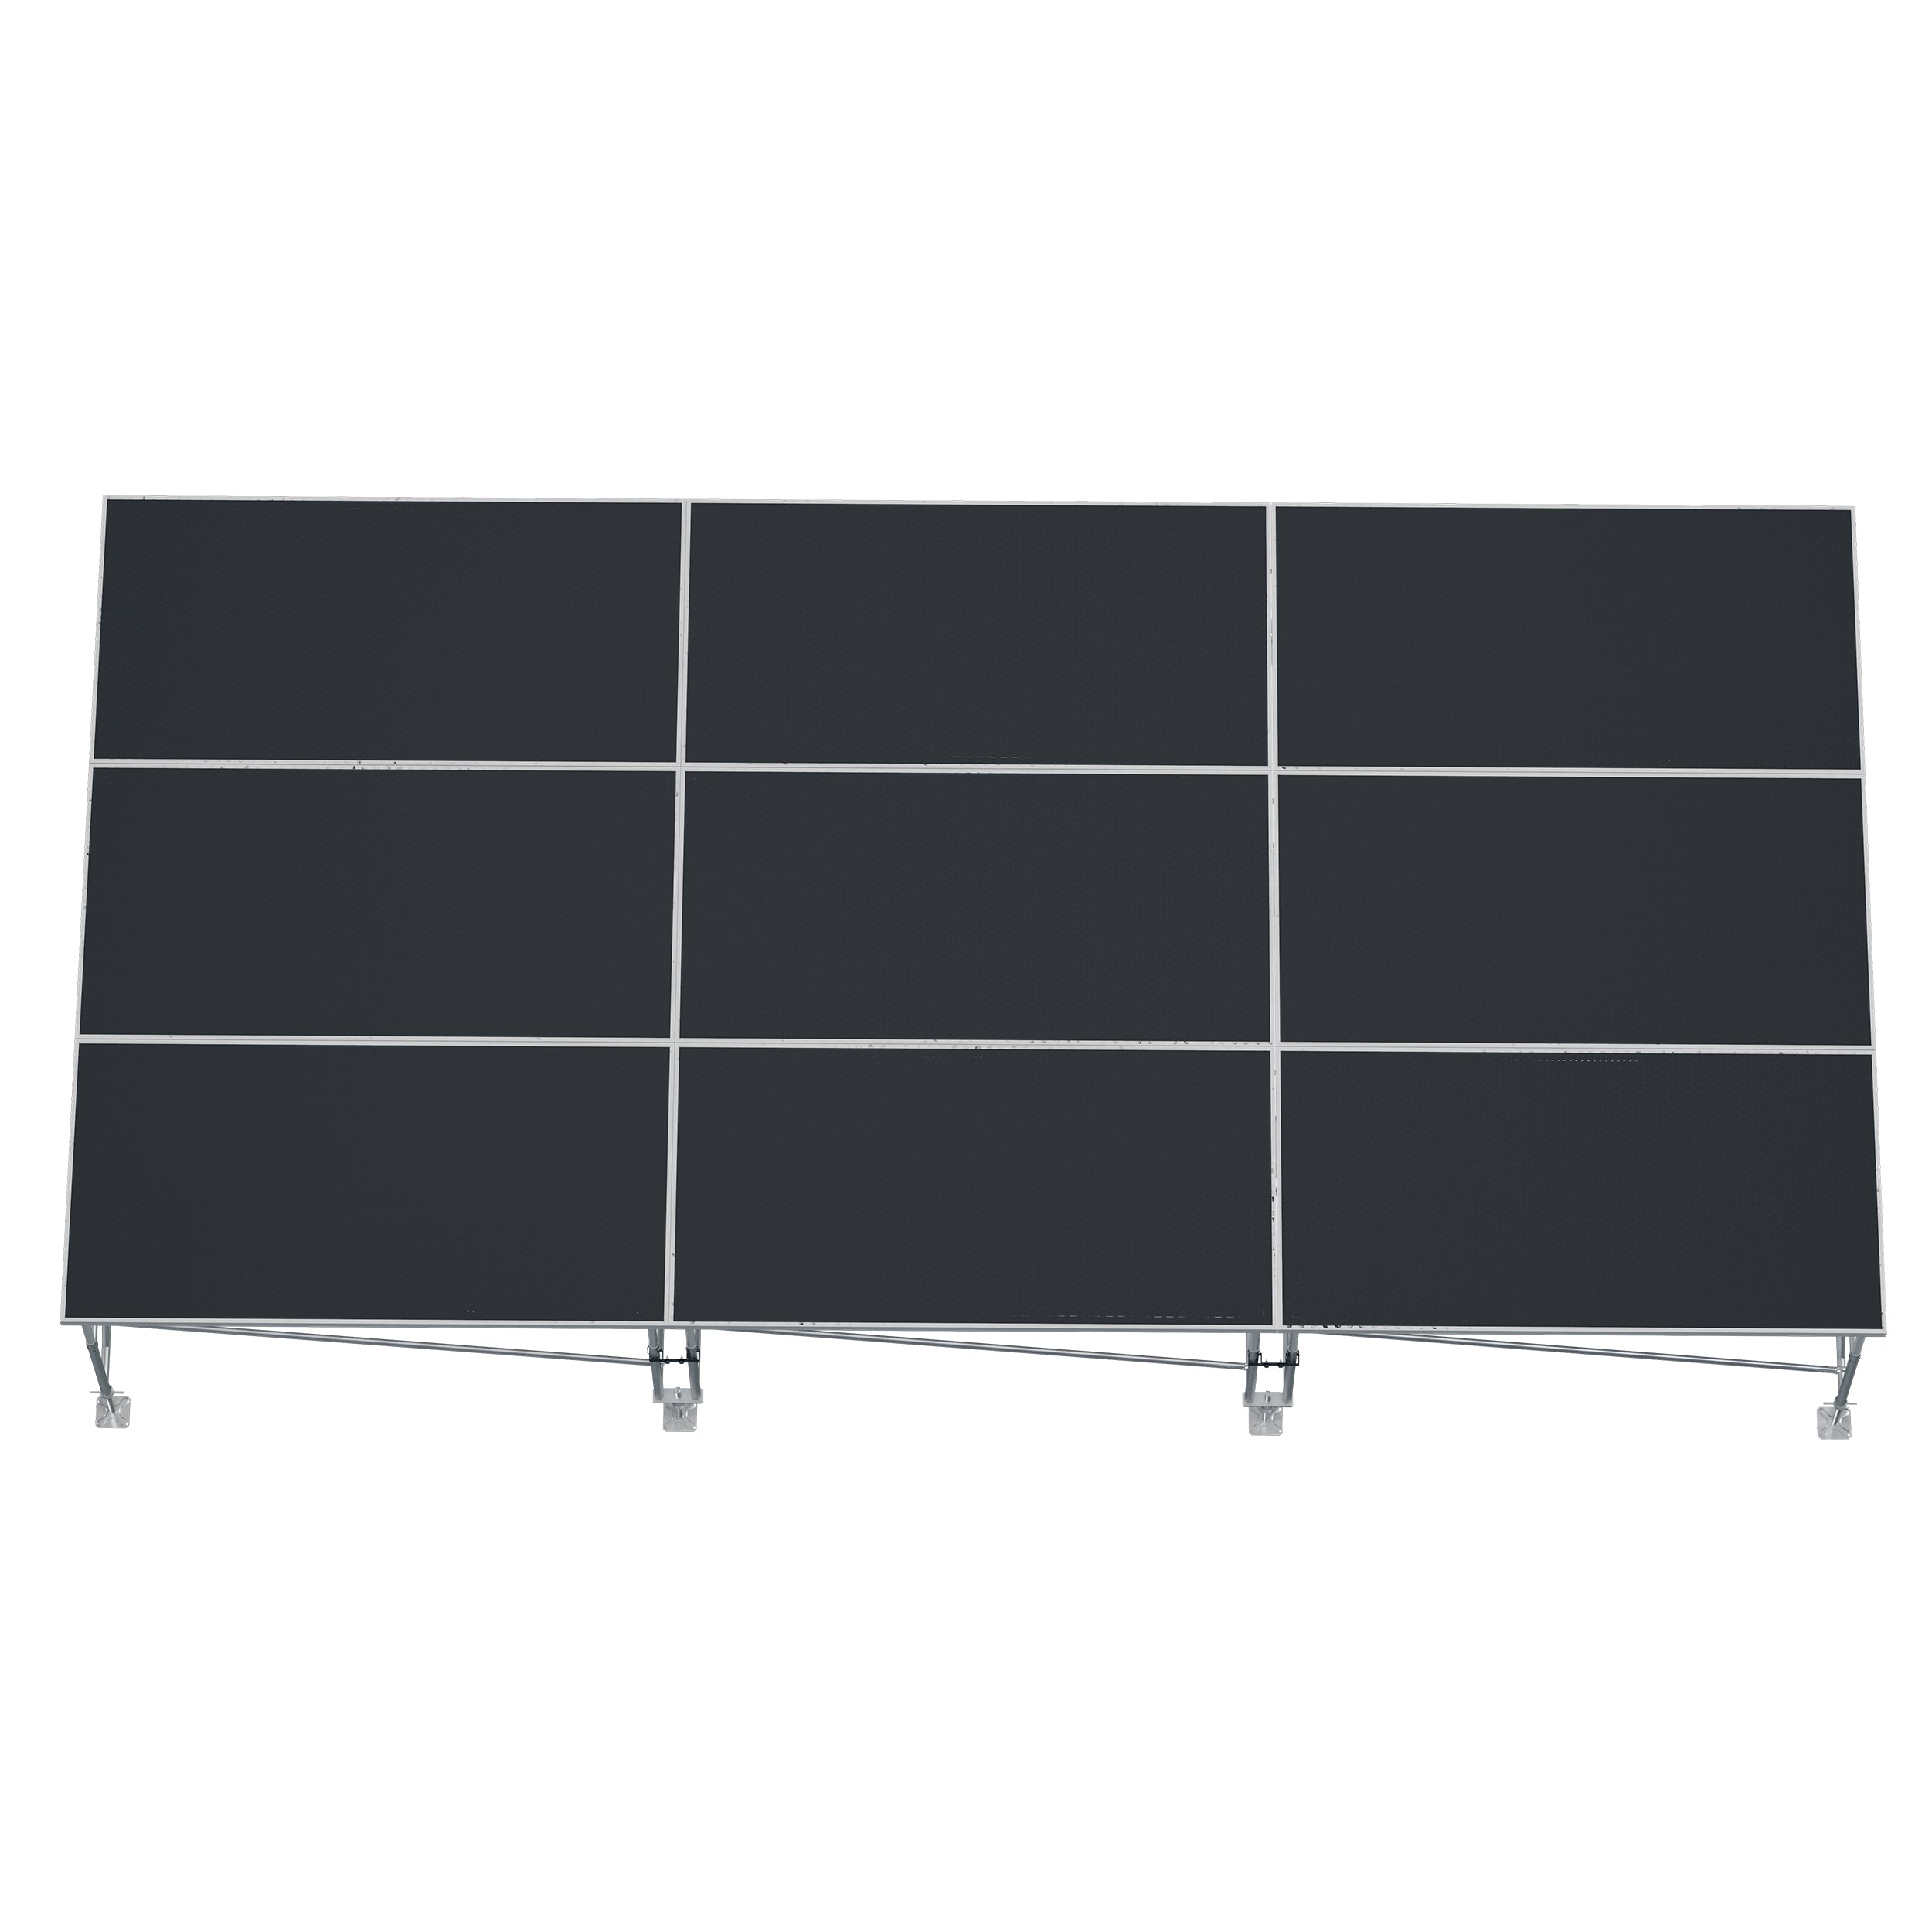 Pro X 12FT x 24FT StageQ 9 Stage Platforms 4FT x 8FT Height Adjustable 28-48 inch with Z Frame Stabilizing System XSQ-12X24PKG48Z